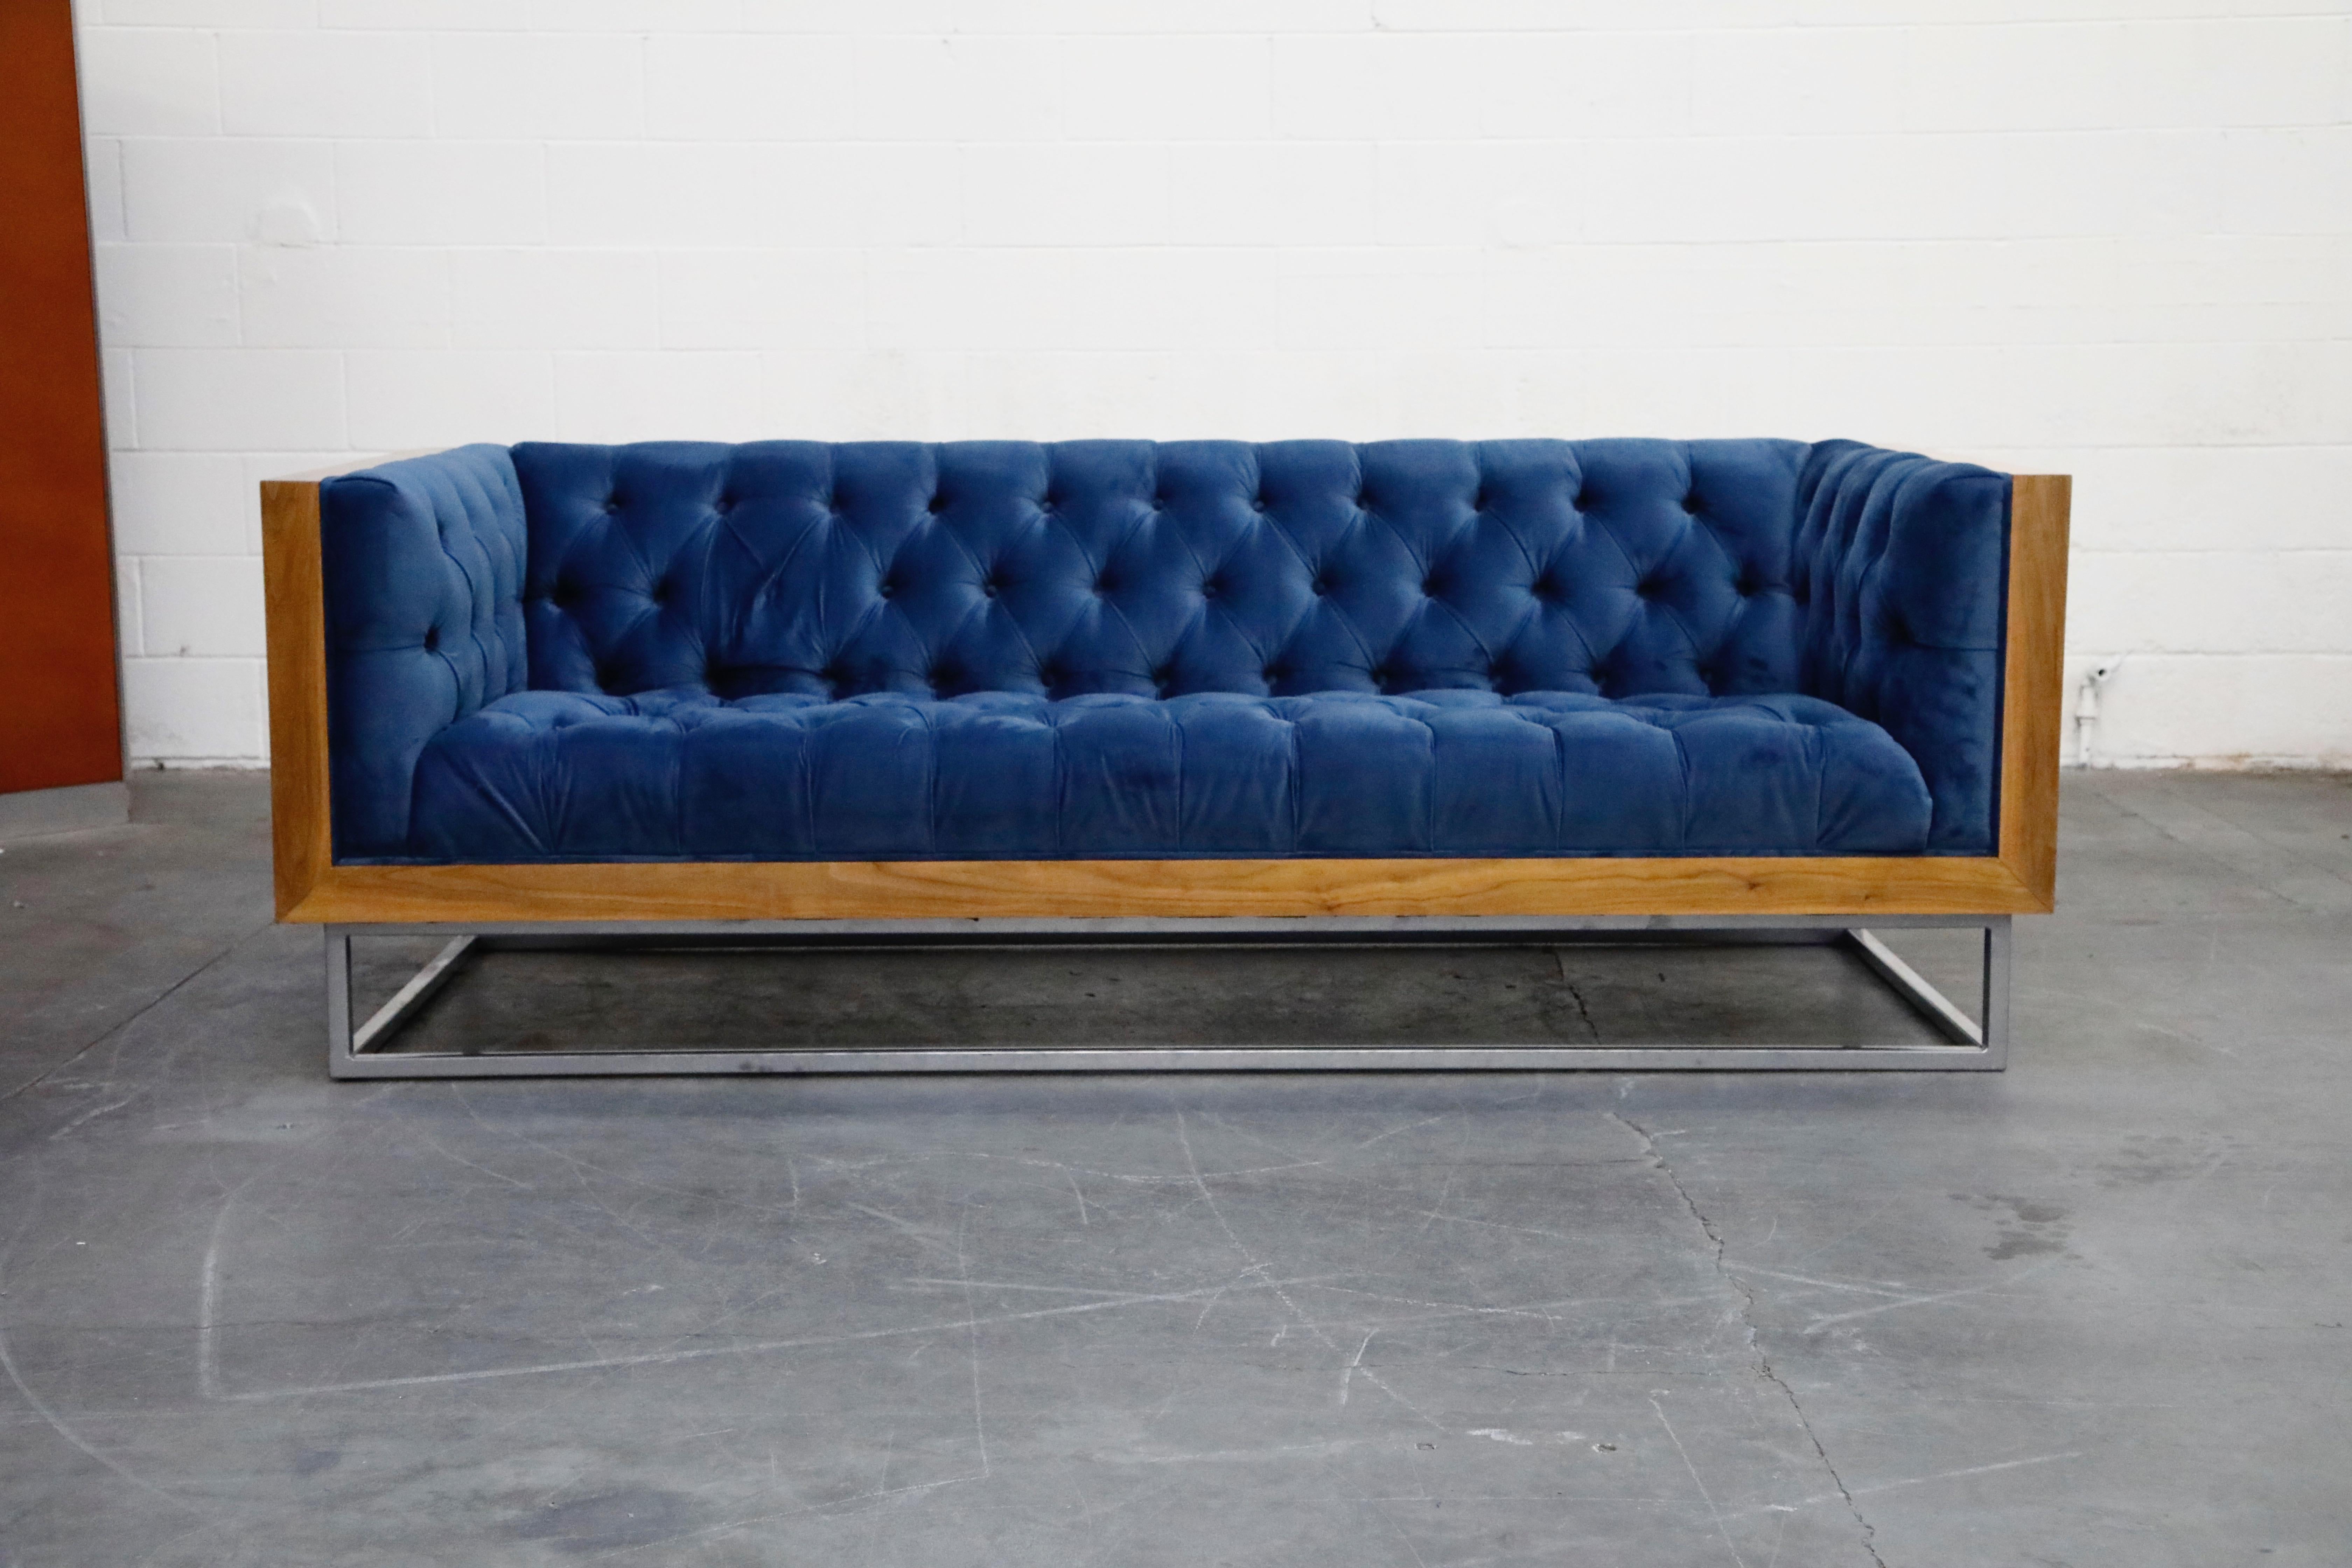 This high quality, well made custom case sofa in the style of Milo Baughman for Thayer Coggin features a hefty wood case design floating on top of a thick steel base. The vibrant blue velvet tufted upholstery features one row of buttons in